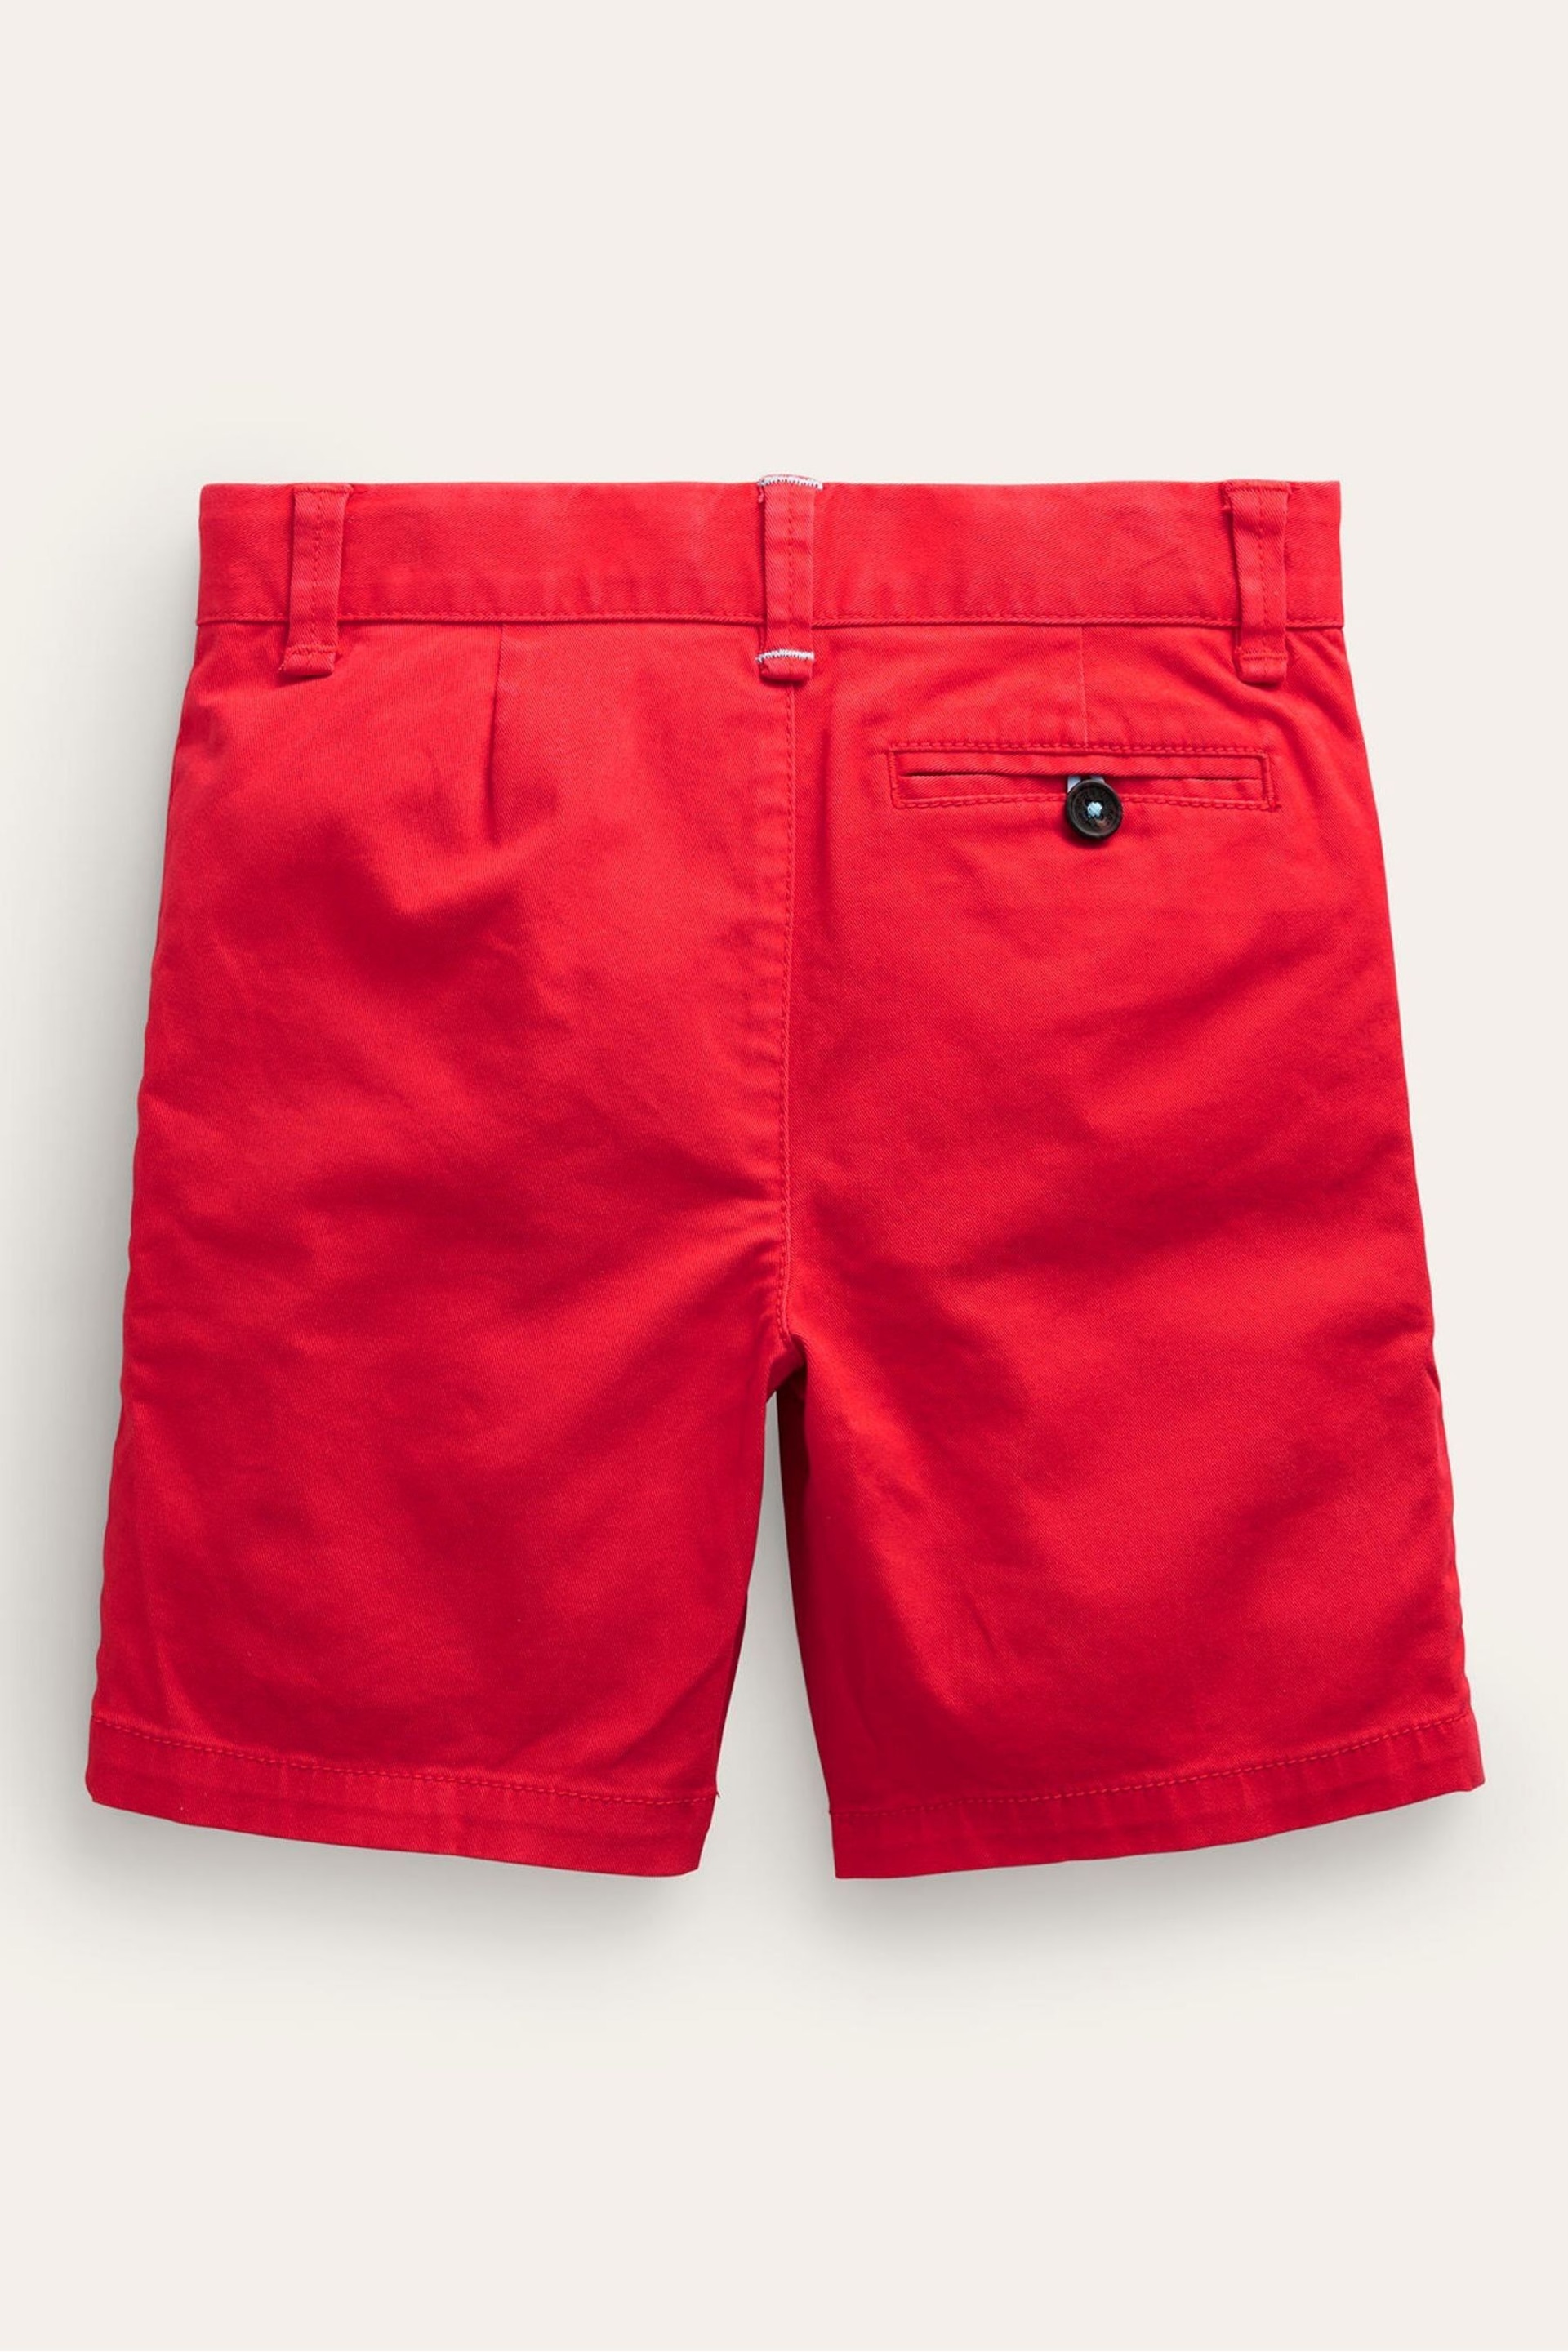 Boden Red Classic Chino Shorts - Image 2 of 3